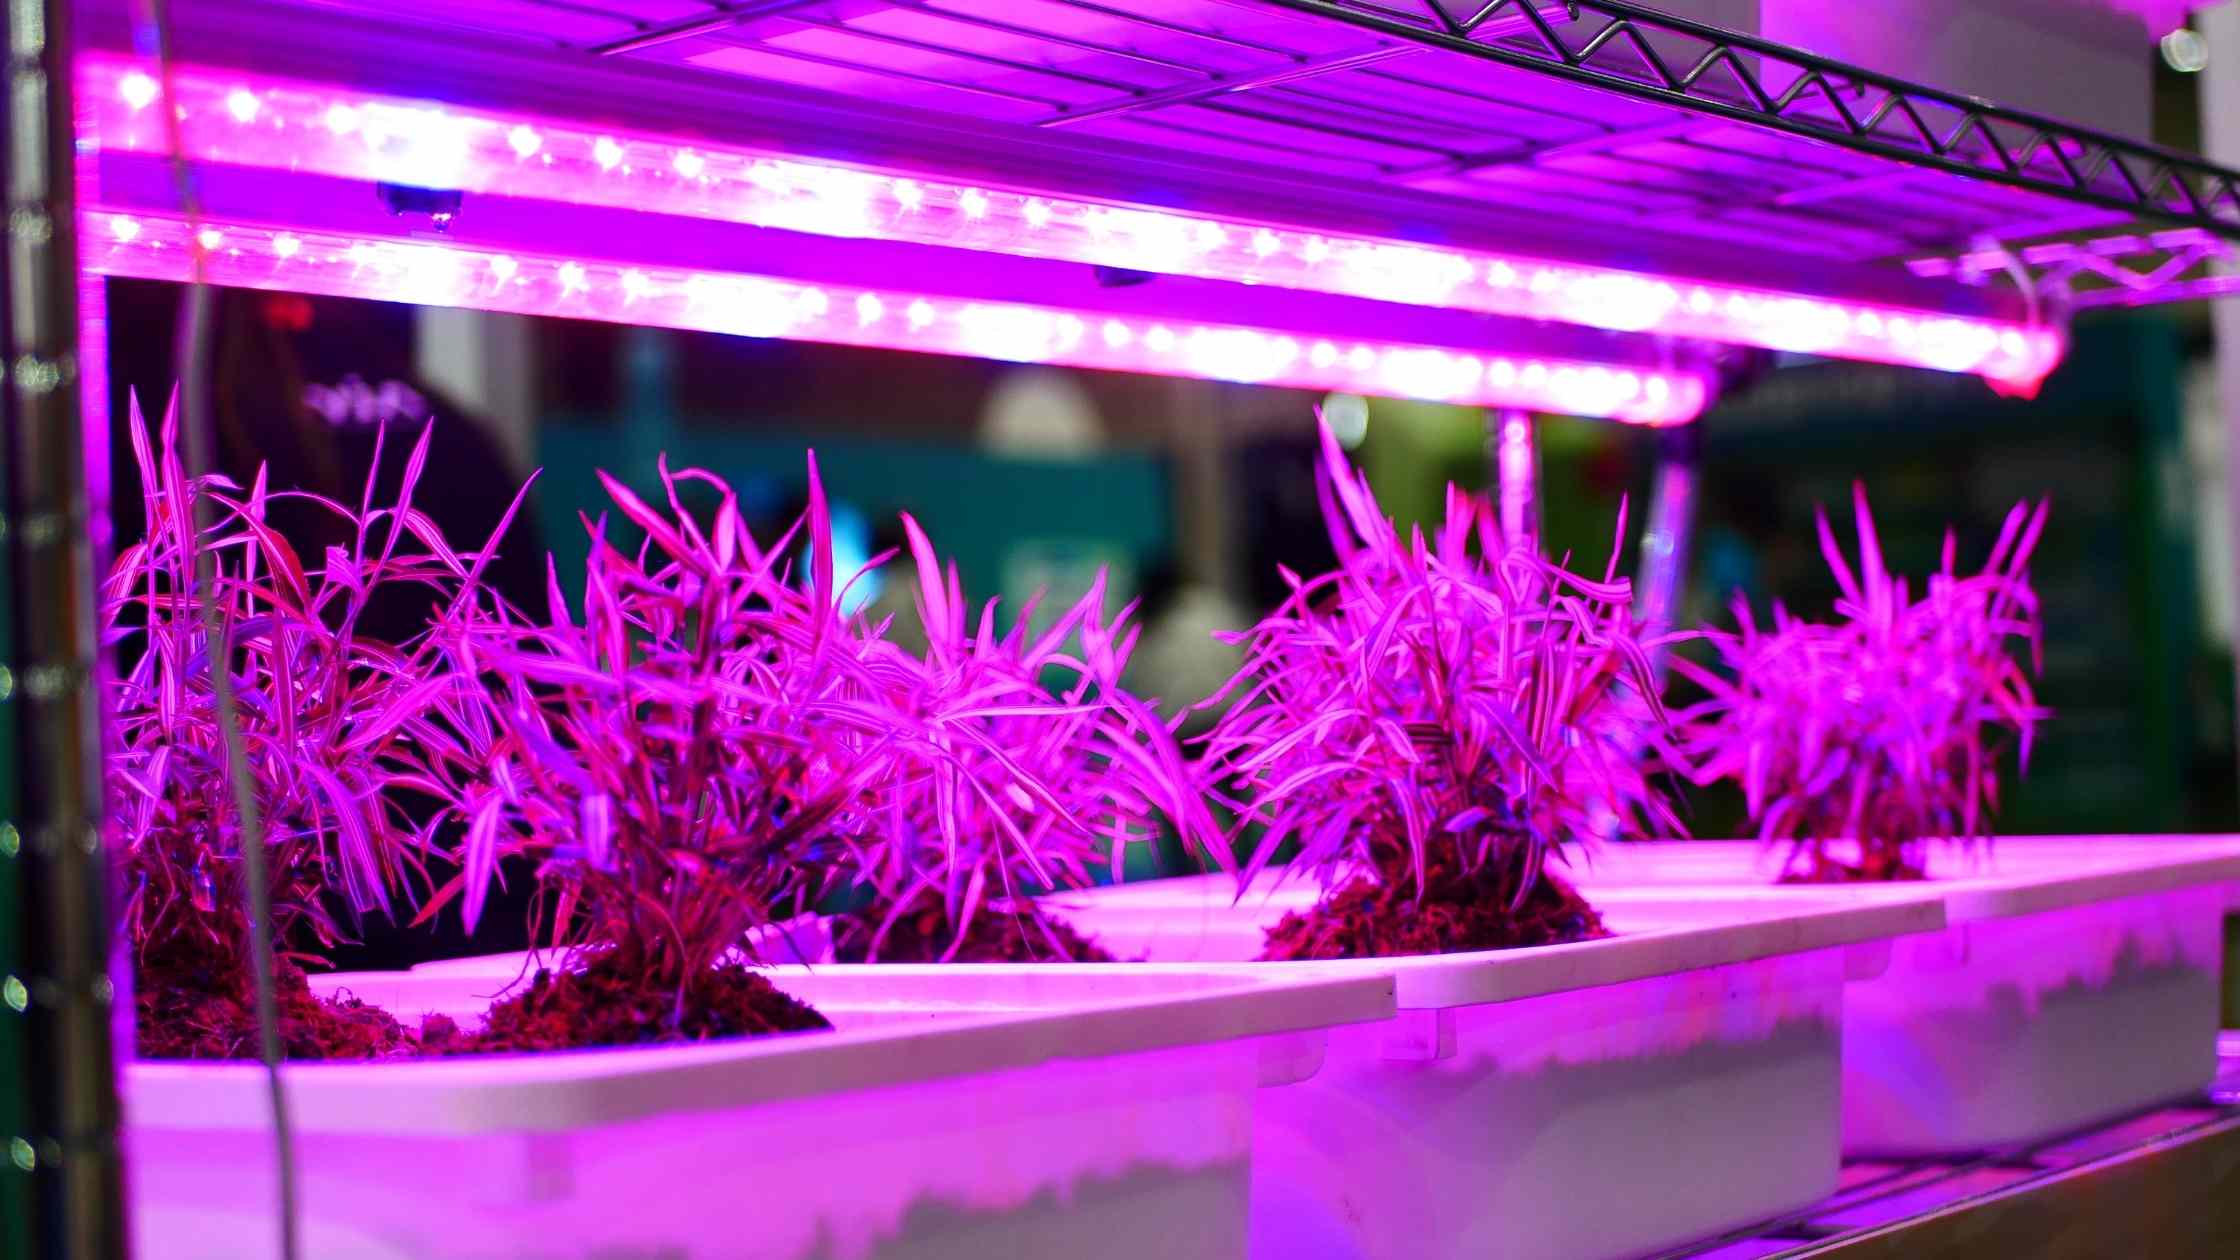 What Is The Best Color Light For Plant Growth?